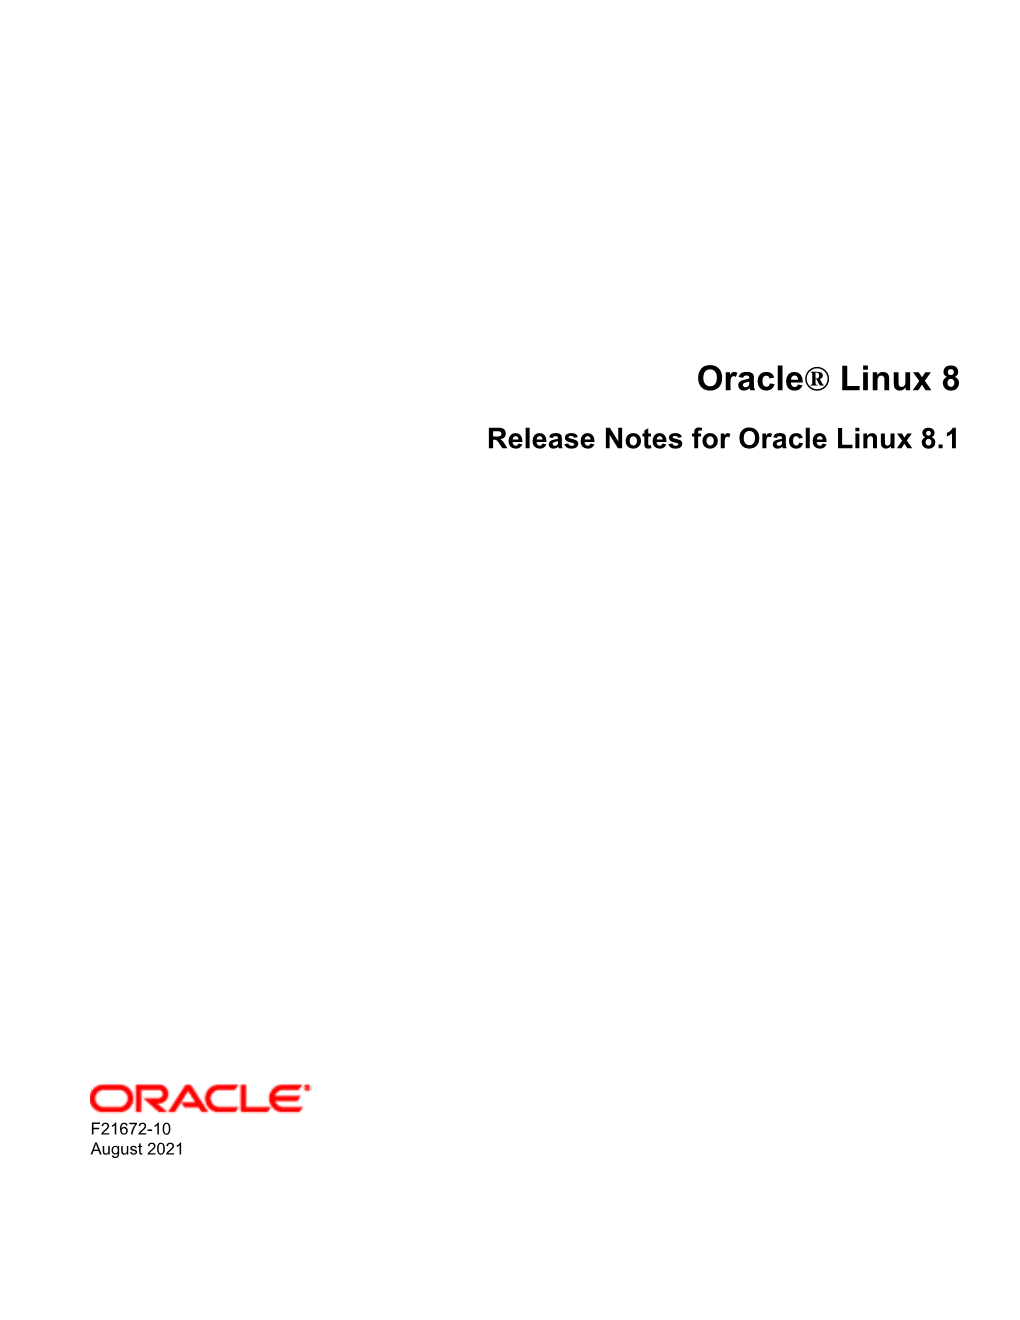 Oracle® Linux 8 Release Notes for Oracle Linux 8.1